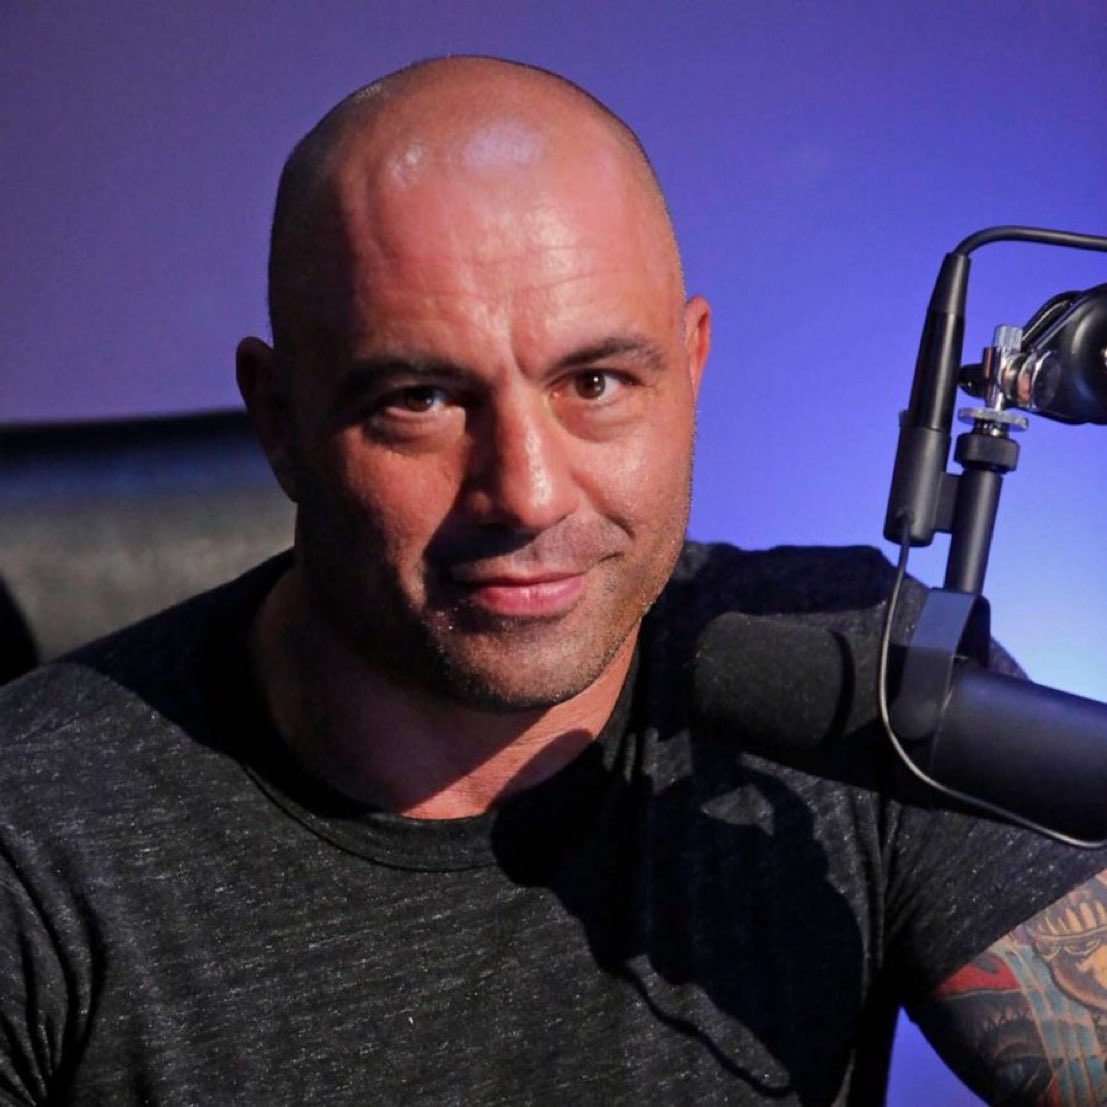 🚨BREAKING:  Joe Rogan just said, 'Instead of receiving the Medal of Freedom, Nancy Pelosi should be in jail for insider trading and setting up January 6th.'

What's your reaction?